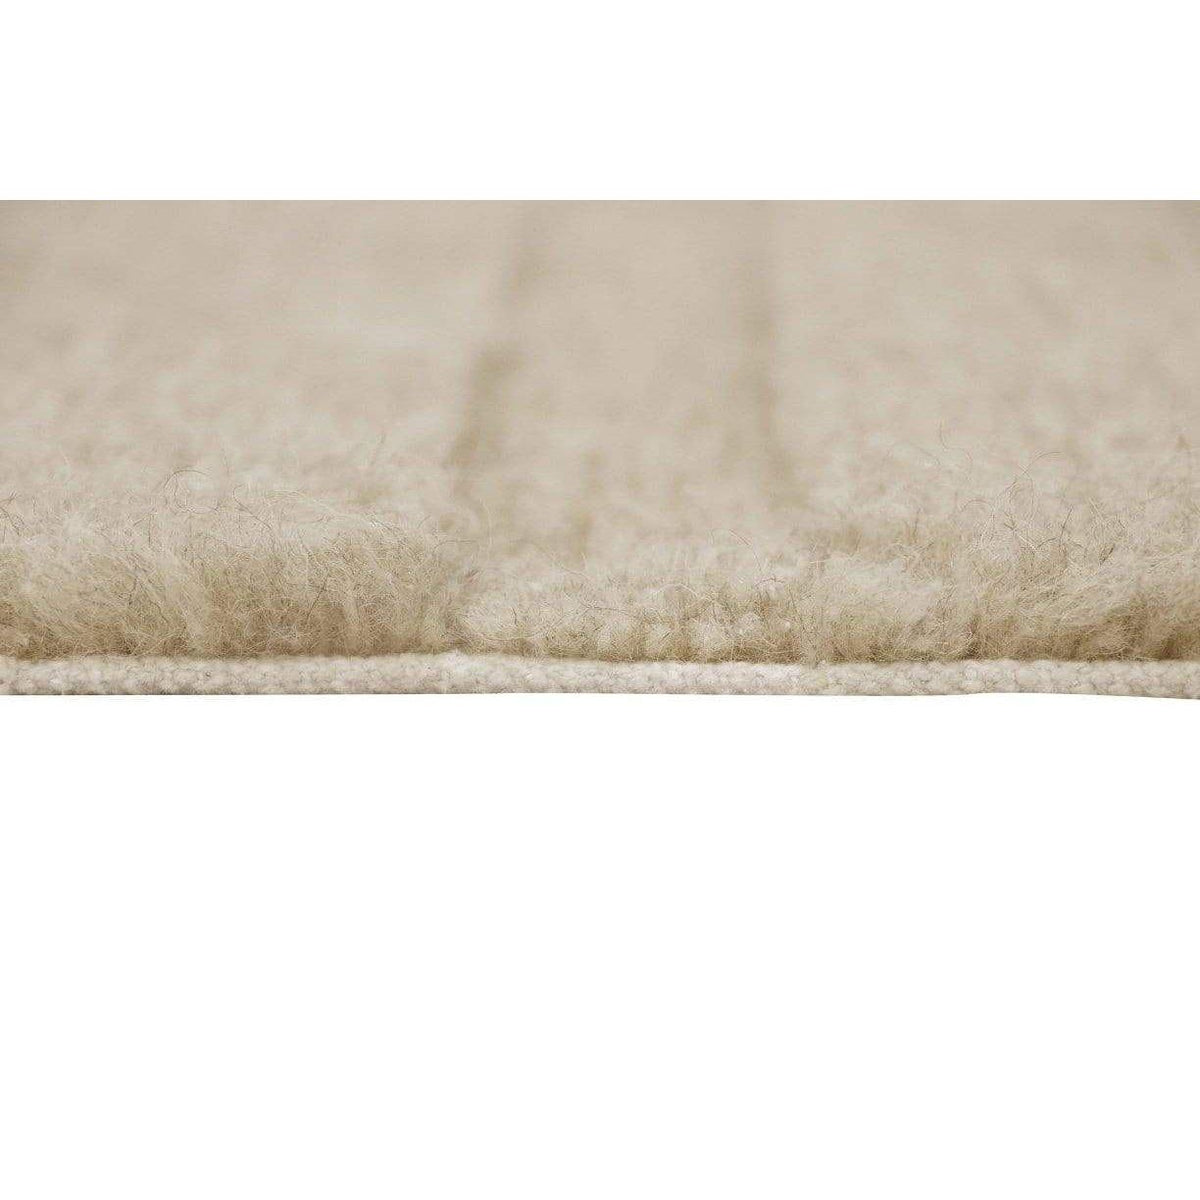 Barcelona Wool Handwoven White Beige Area Rug 6'x9' + Reviews